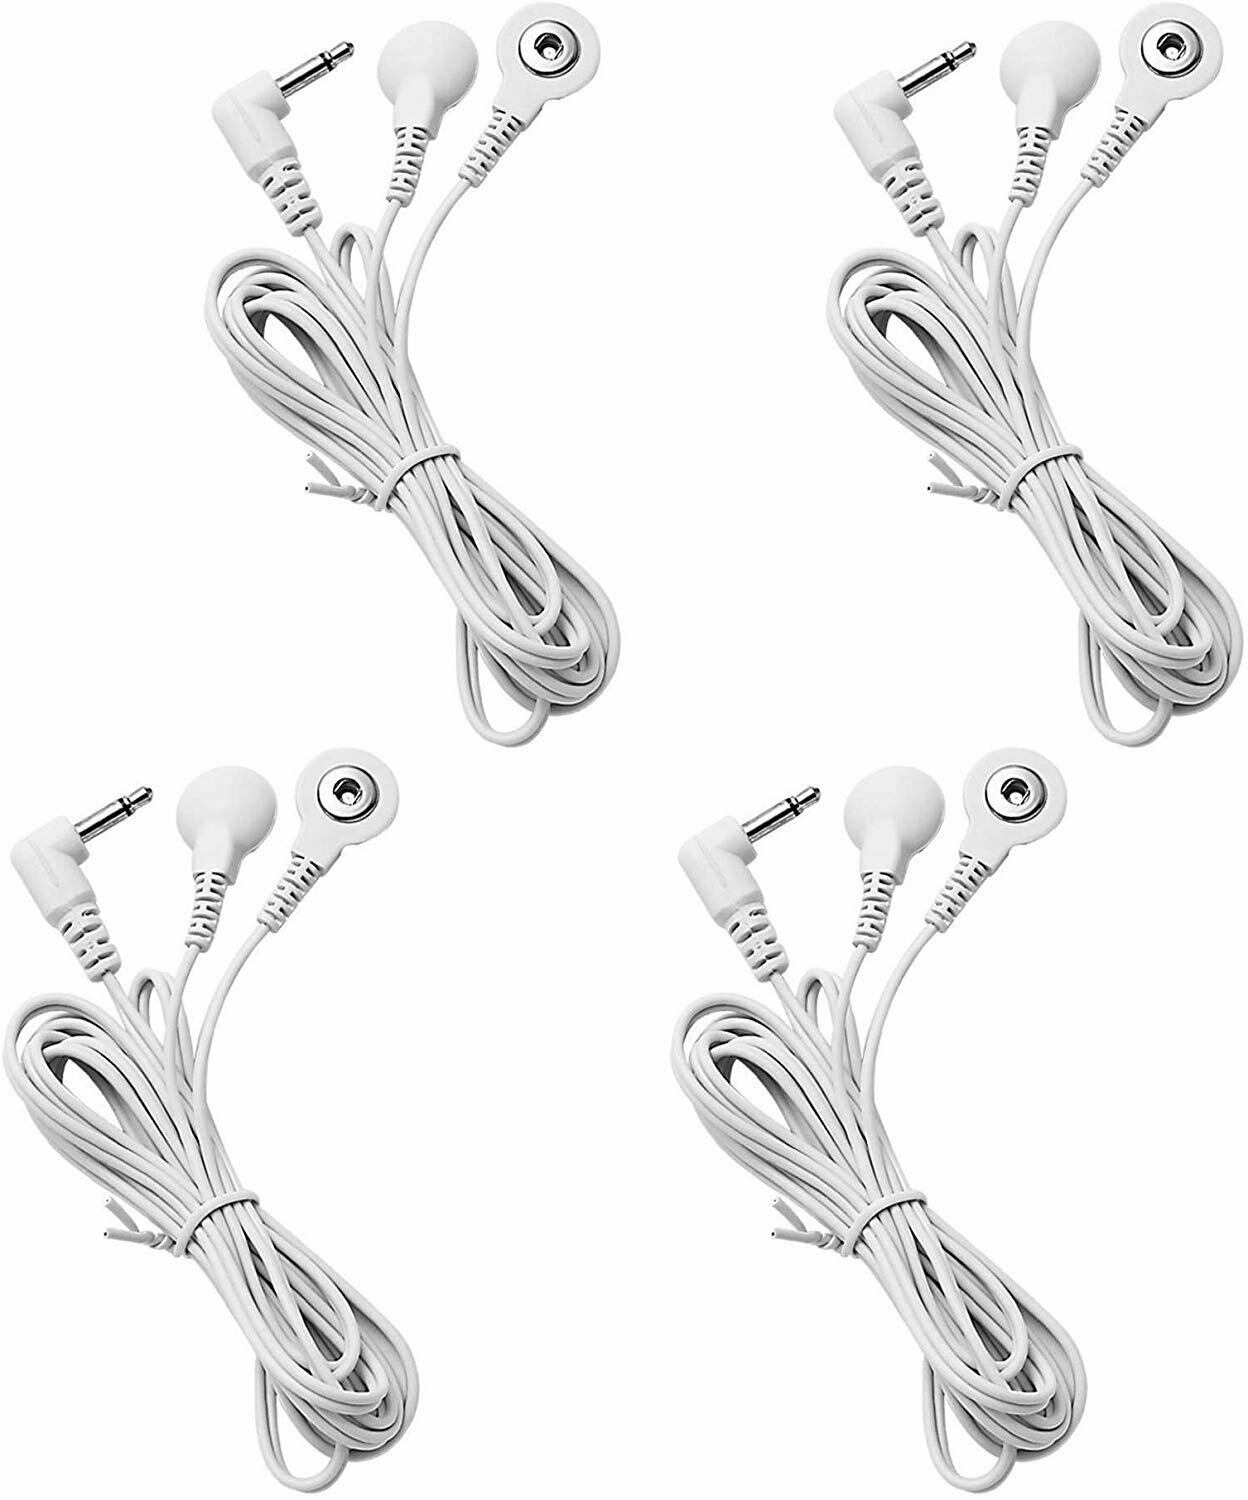 MedSense 2.5mm-3.5mm Snap On Lead Wires Electrode Massager TENS/EMS Replacement